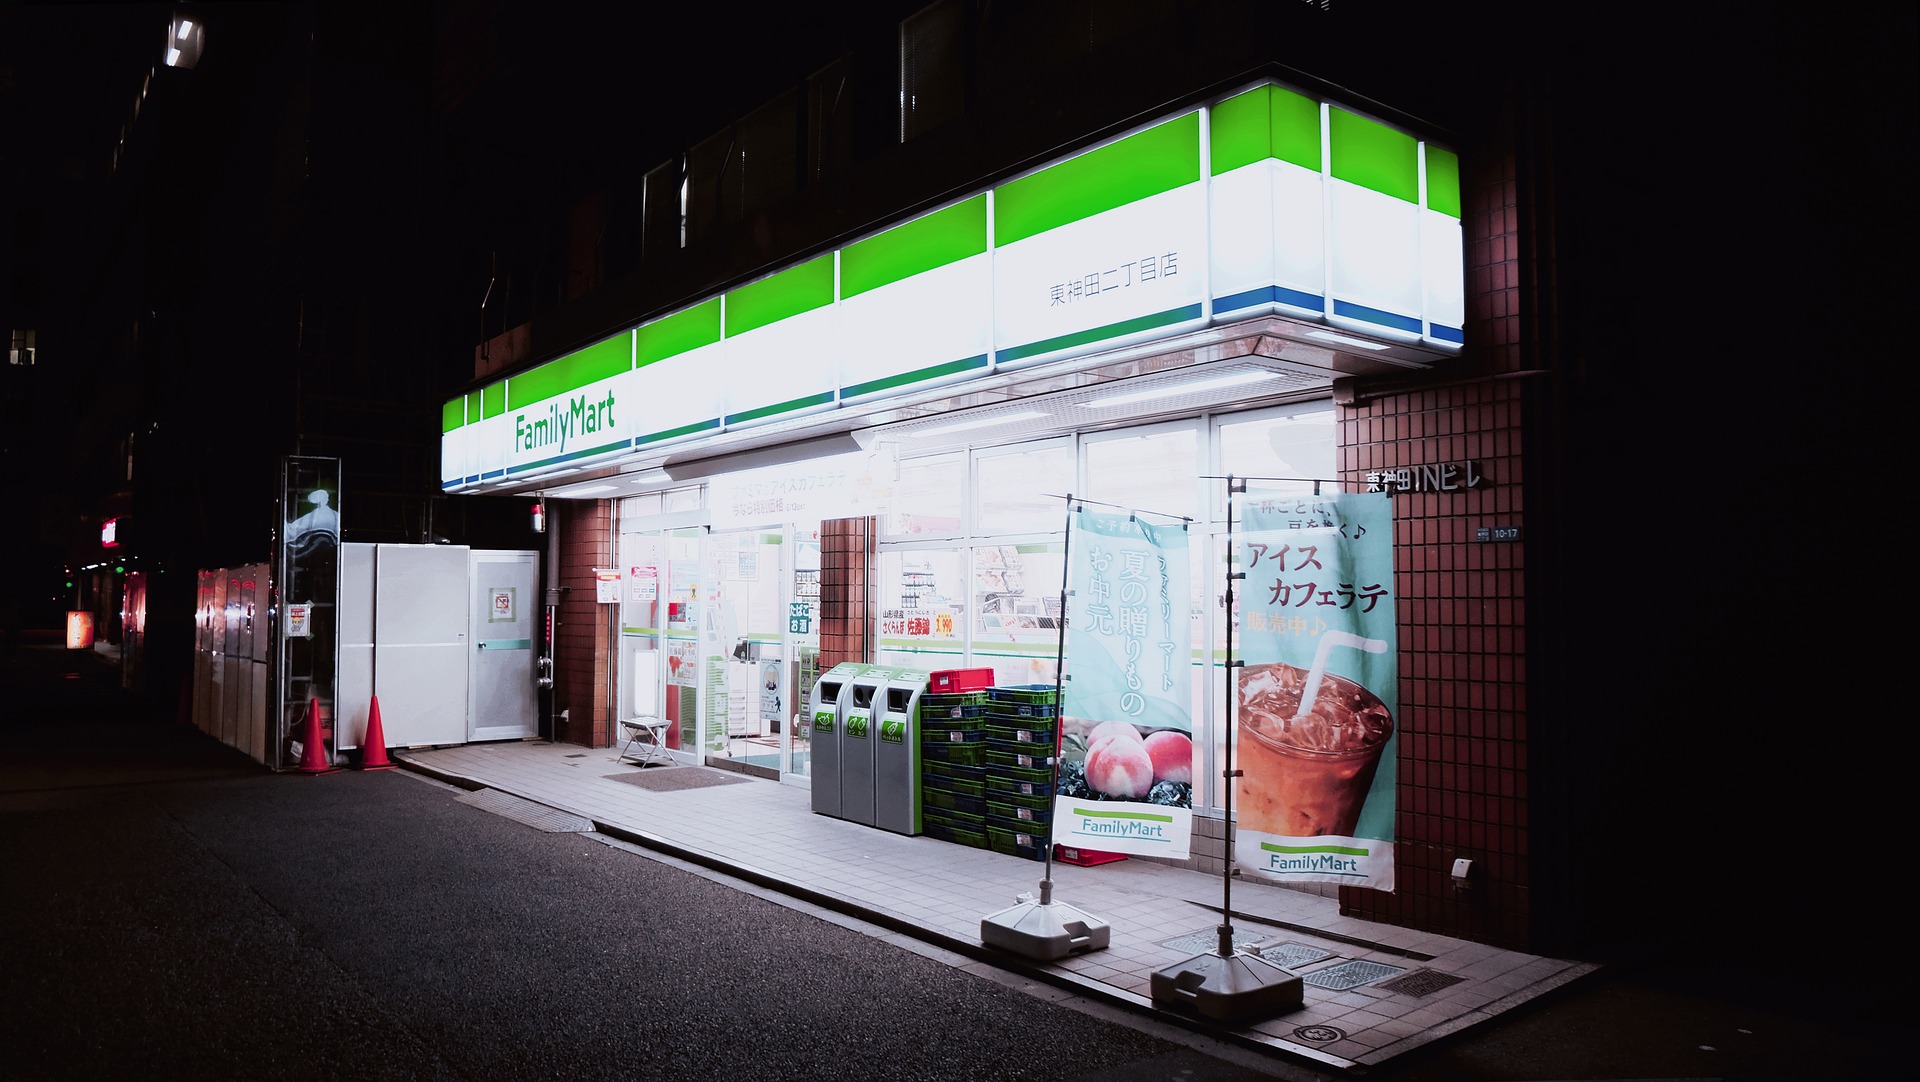 manliest - manliness - convenience store at night